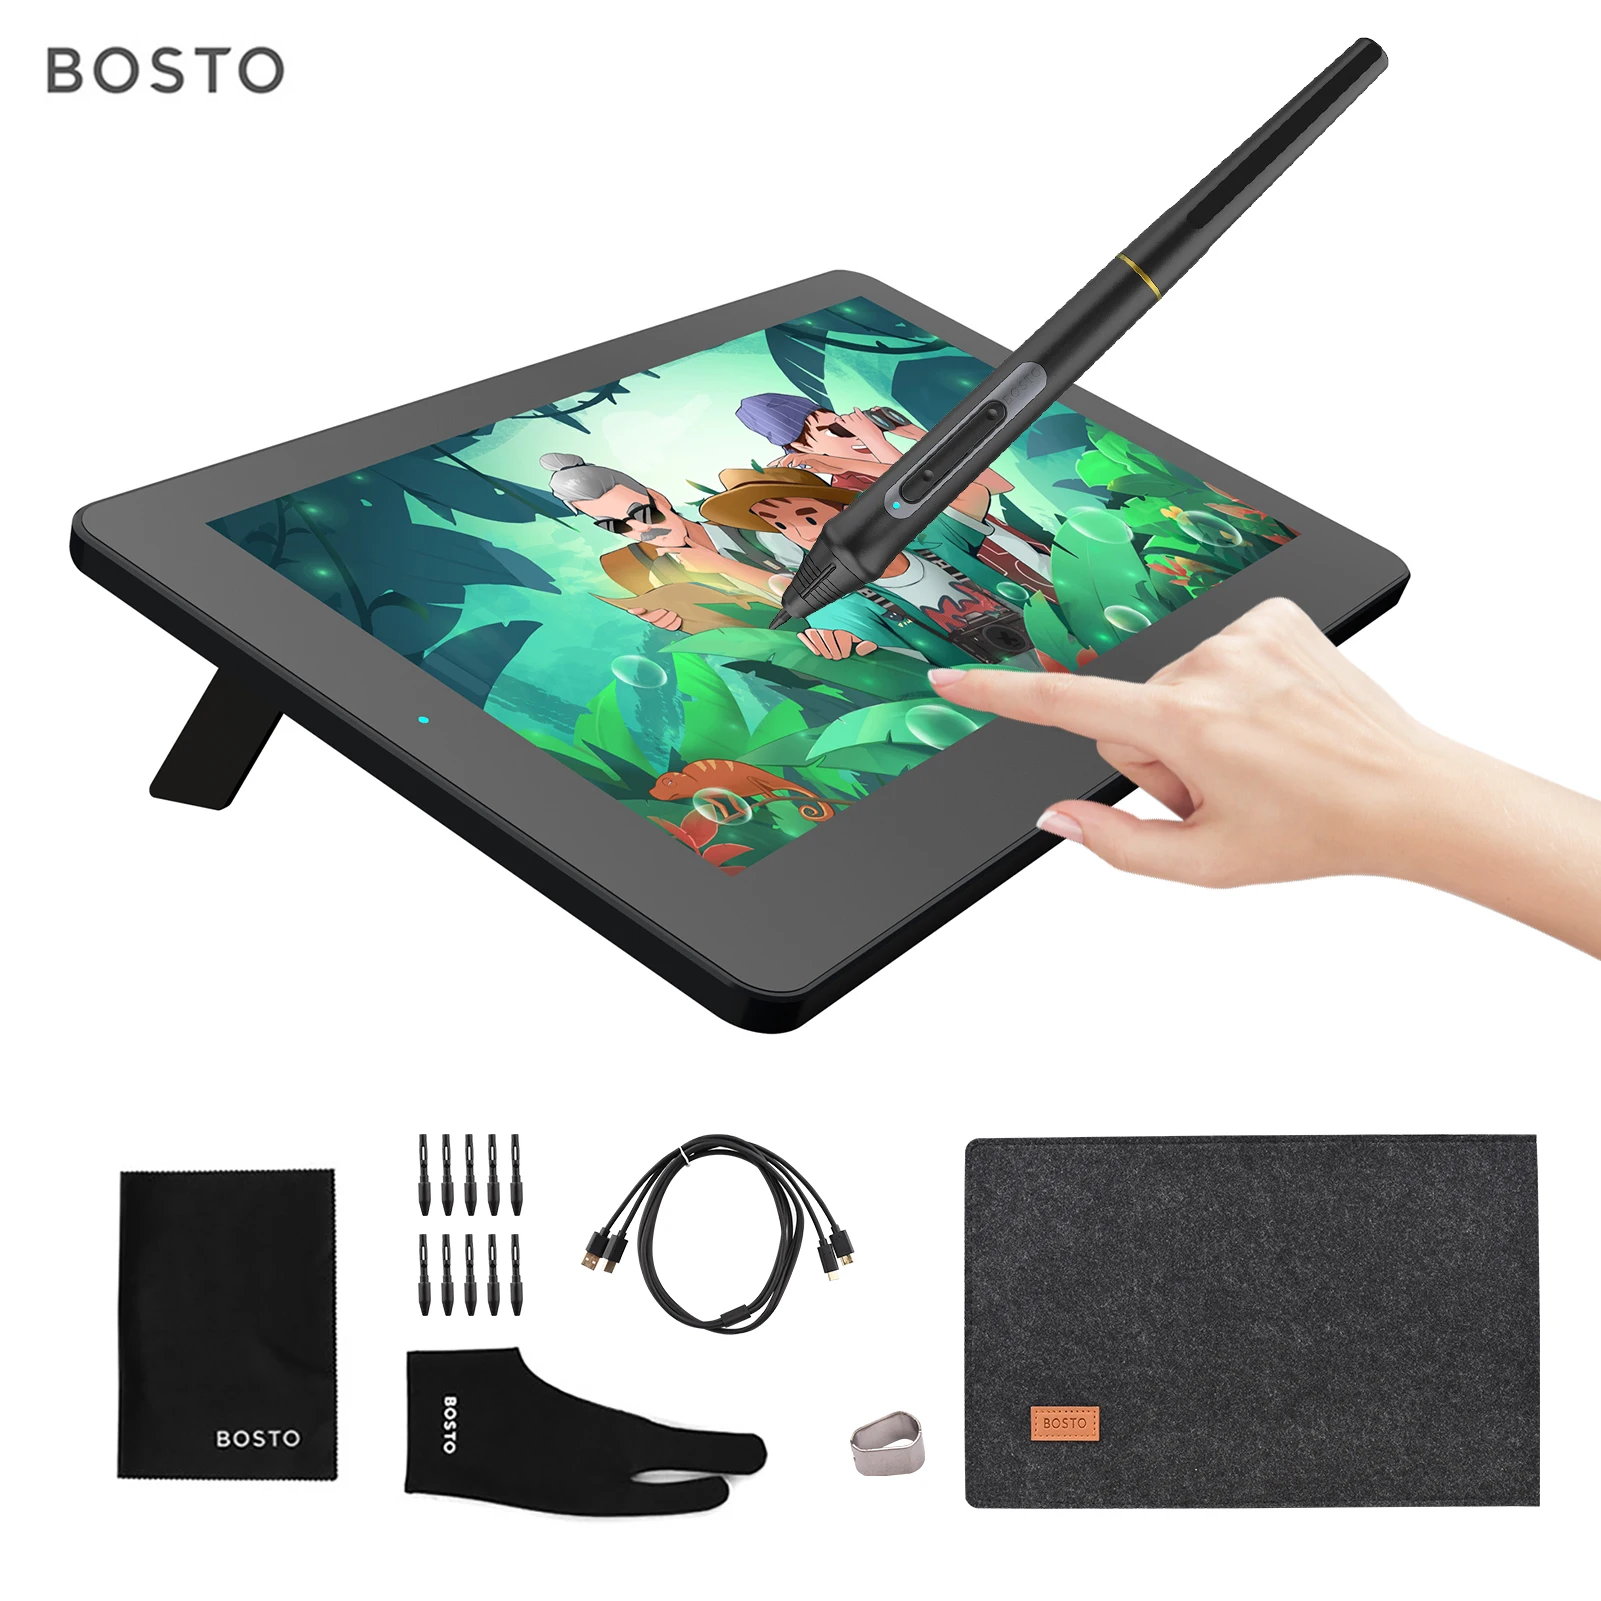 

BOSTO BT-12HD Portable 11.6 Inch HD H-IPS LCD Graphics Drawing Tablet 1366*768 Display Support 8192 Pressure Level